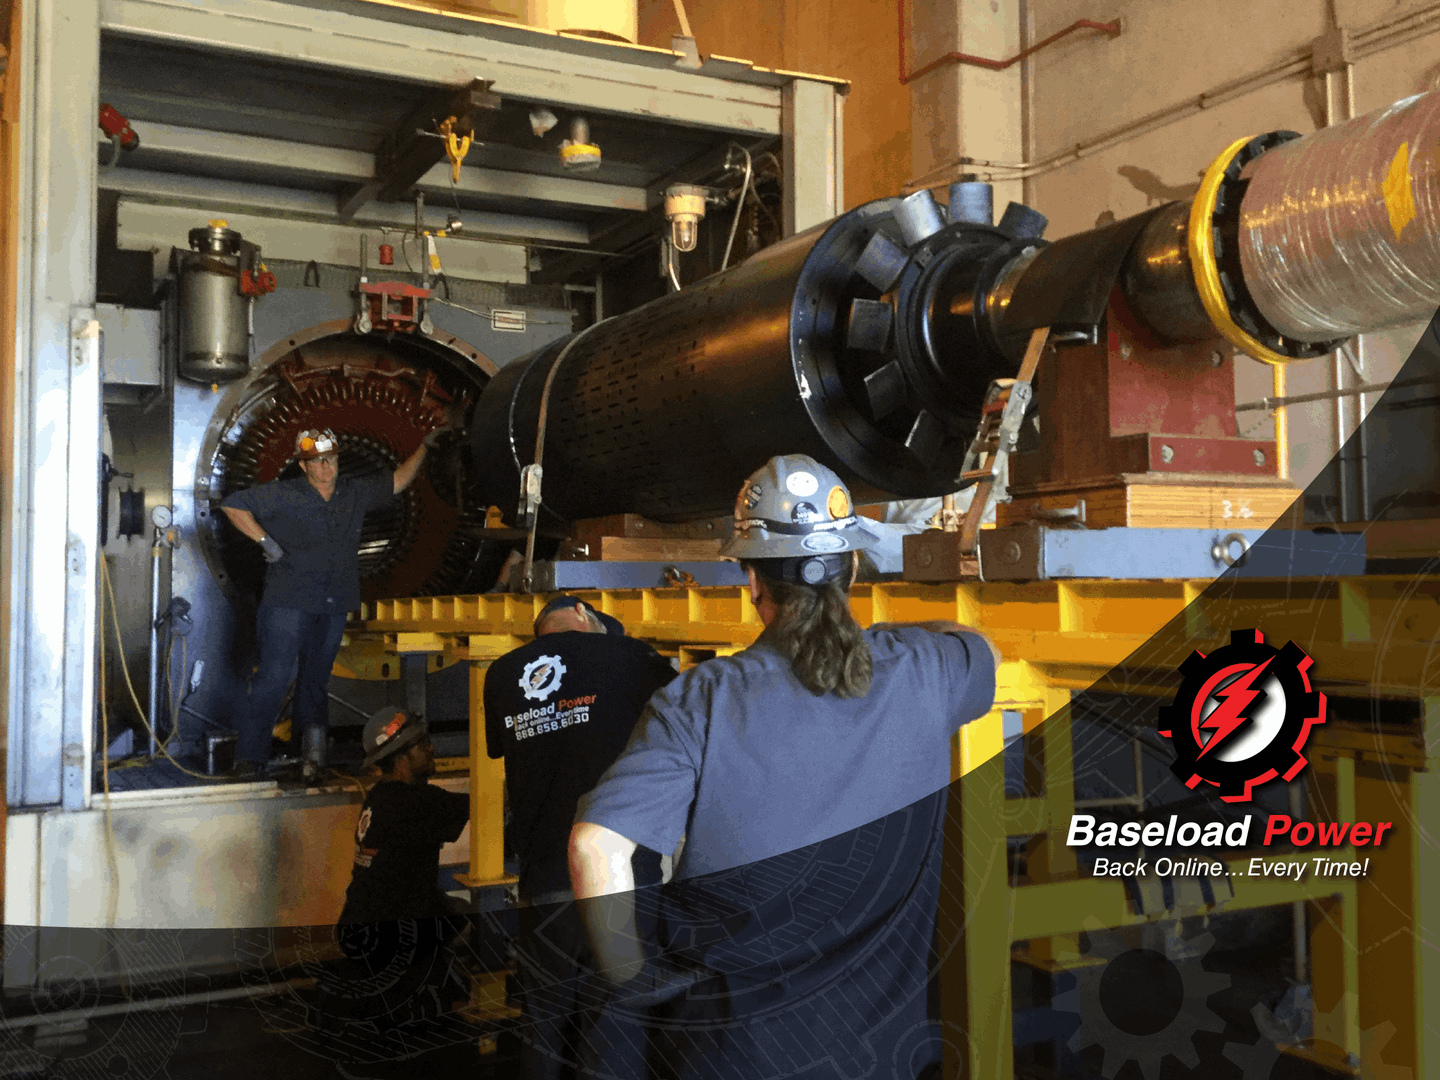 Baseload Power offers dedicated service